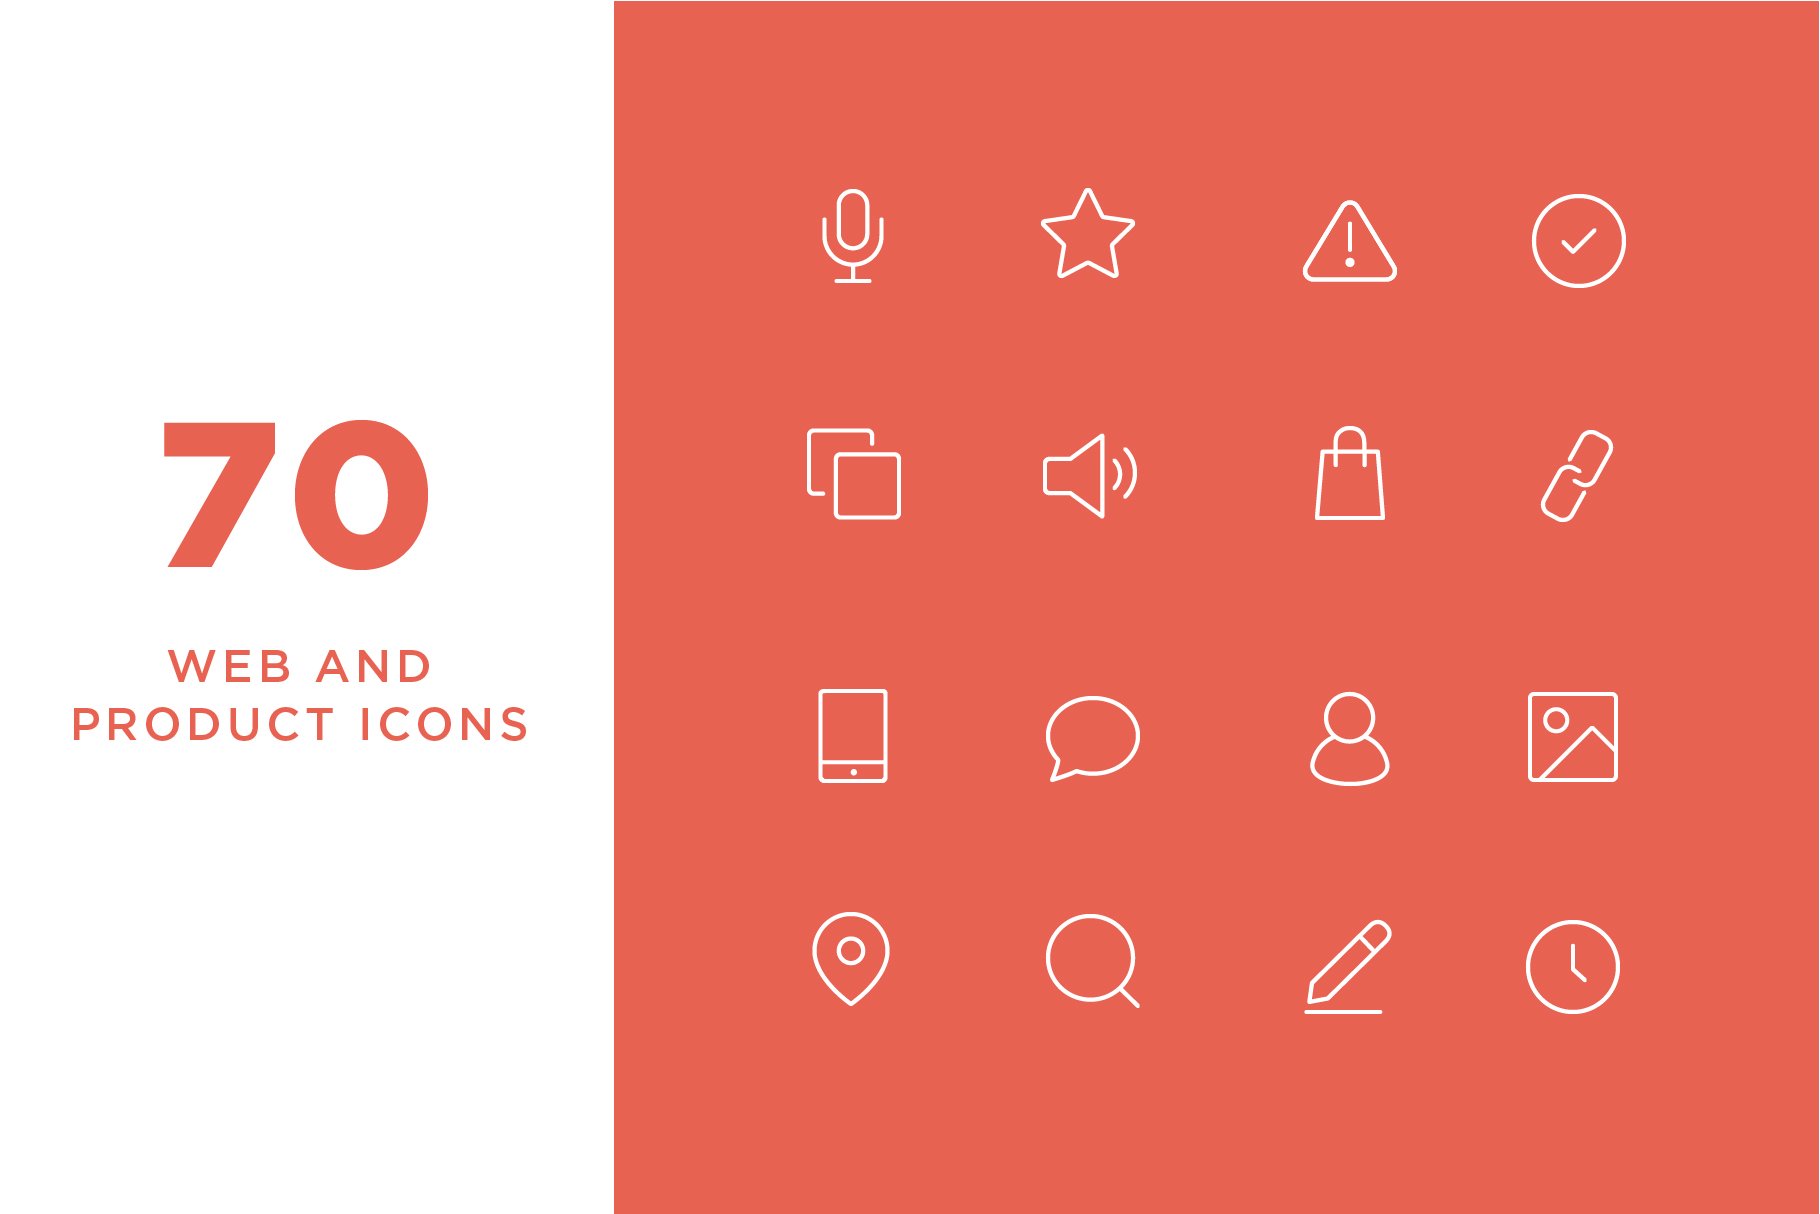 Minimal Web and Product Icons cover image.